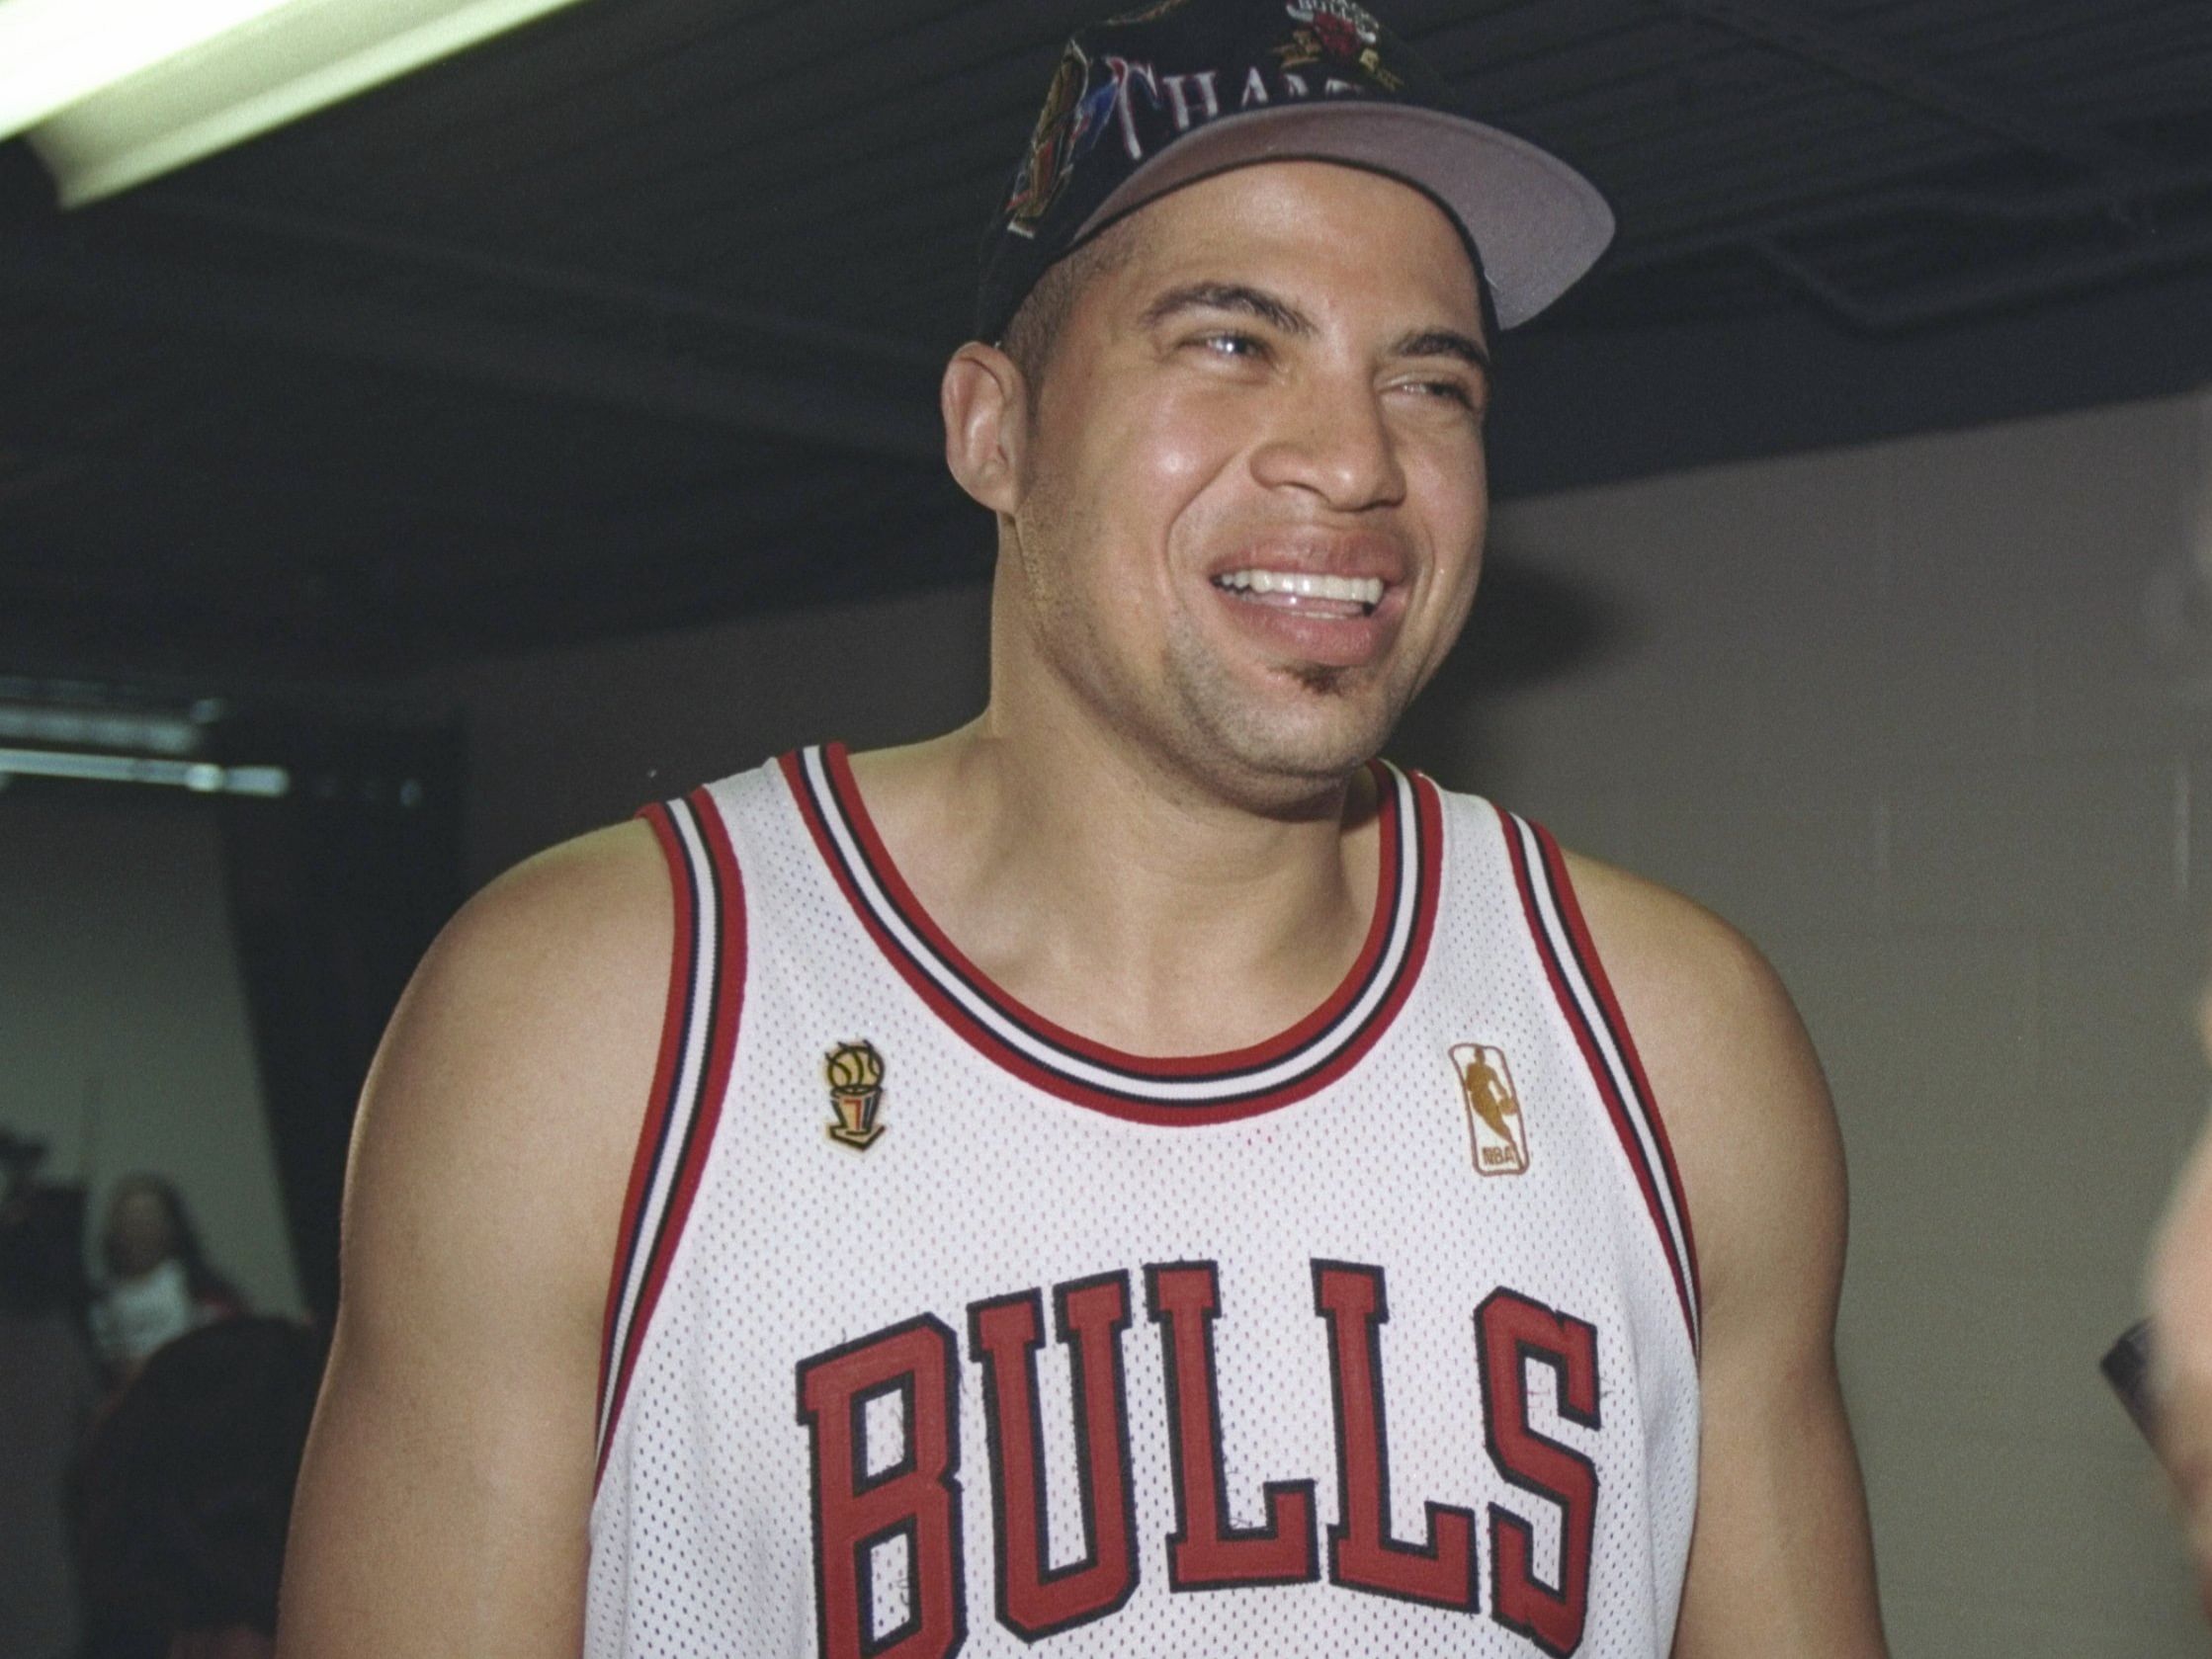 Bison Dele during his time with the Chicago Bulls.